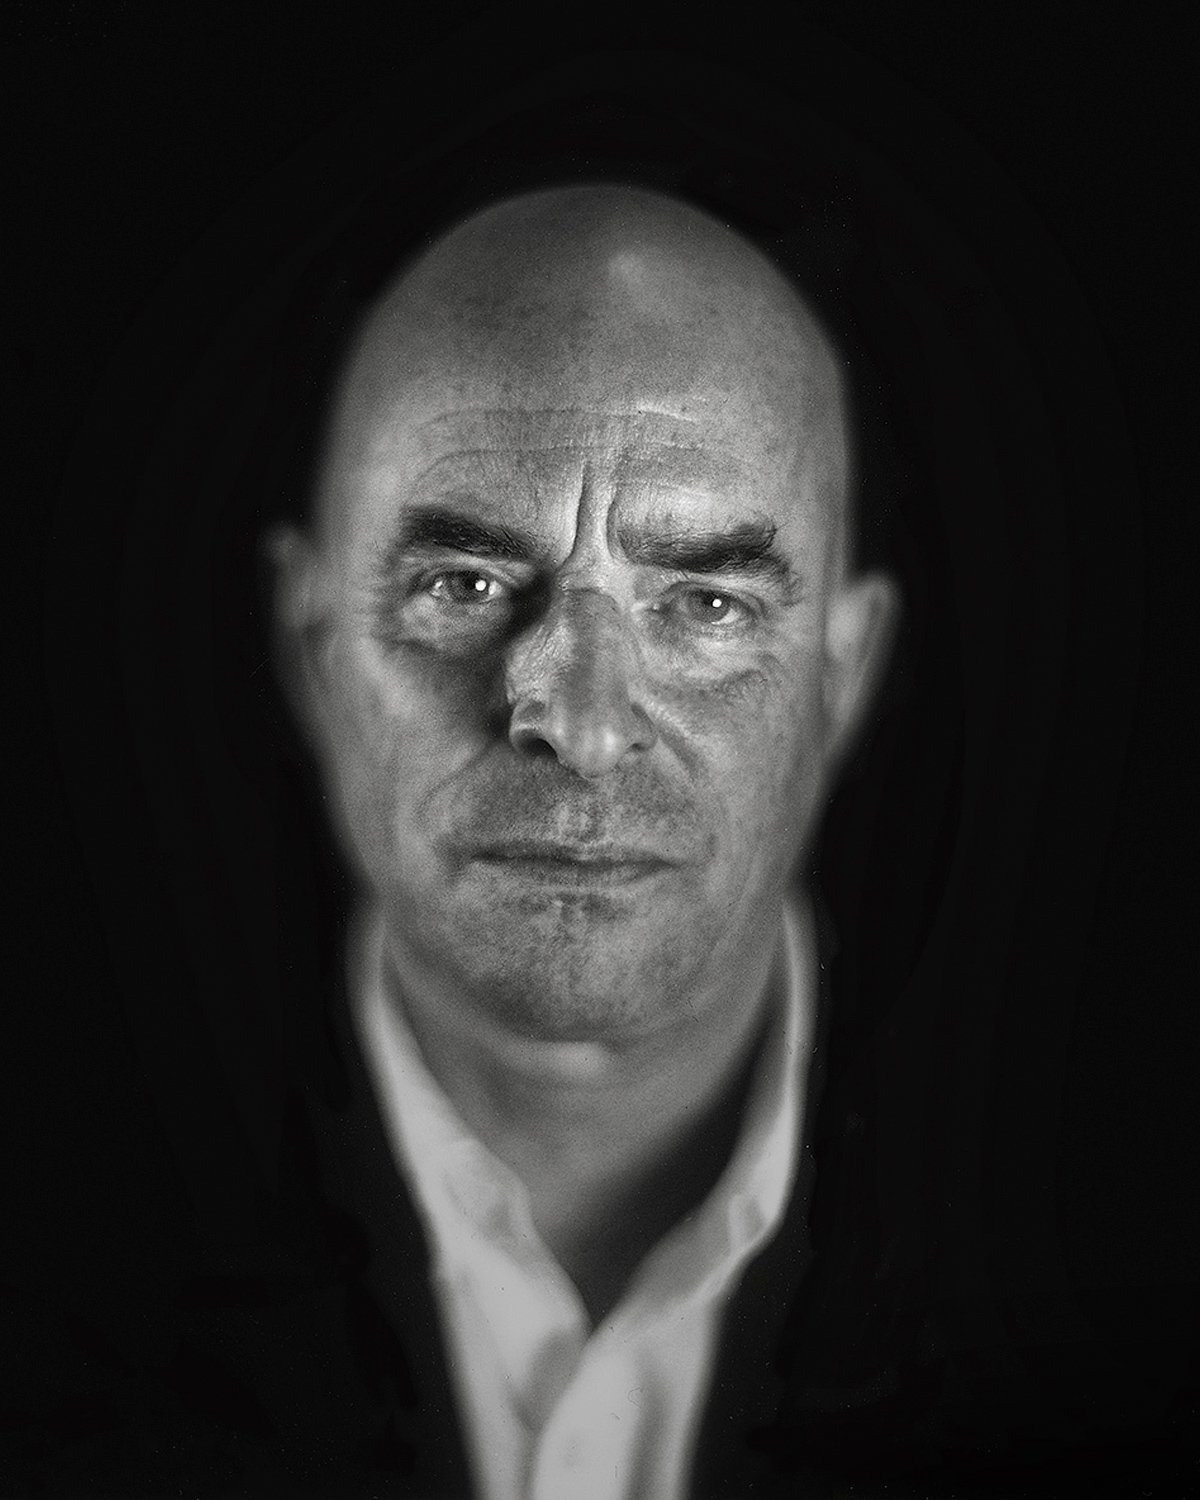 Dramatic Black and White 4x5 Portraits by Andy Lee